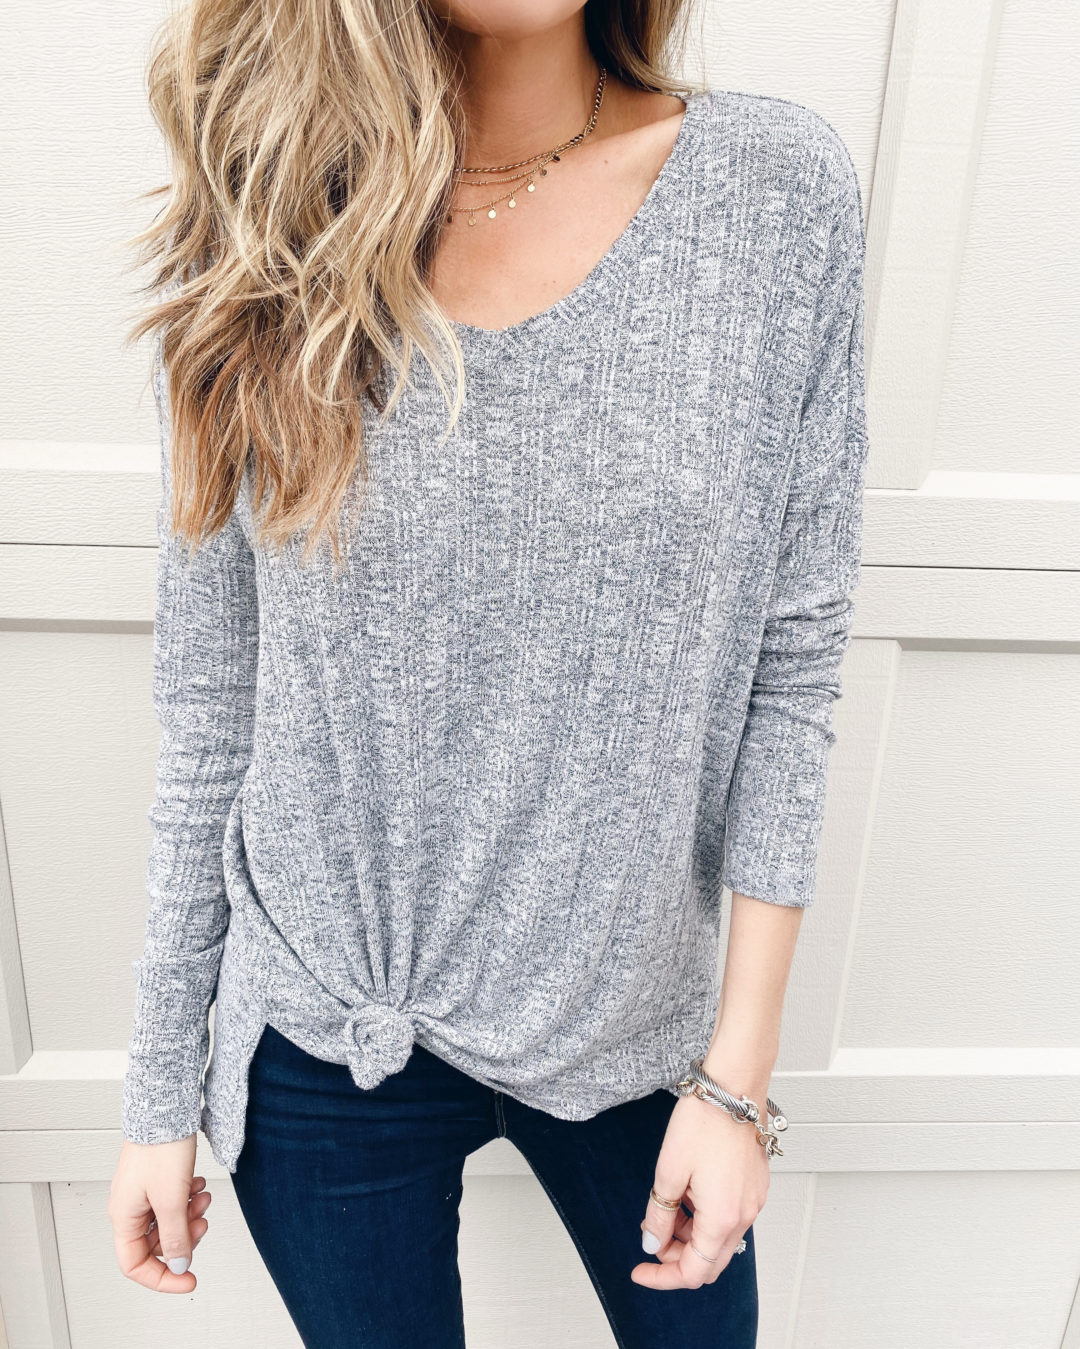 walmart outfit ideas - jeggings and tunic outfit - pinteresting plans fashion blog